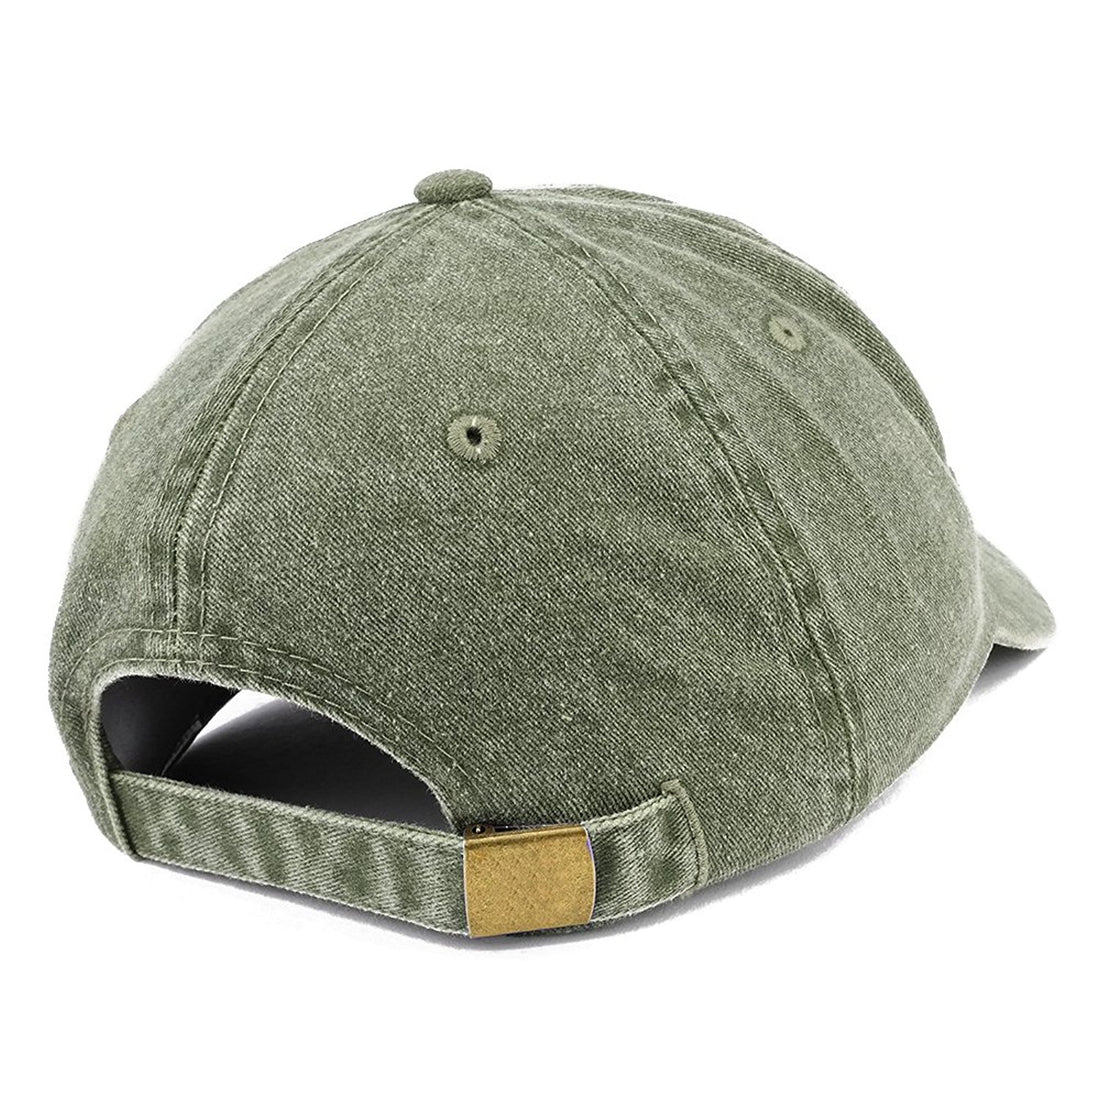 Trendy Apparel Shop Established 1959 Embroidered 60th Birthday Gift Pigment Dyed Washed Cotton Cap